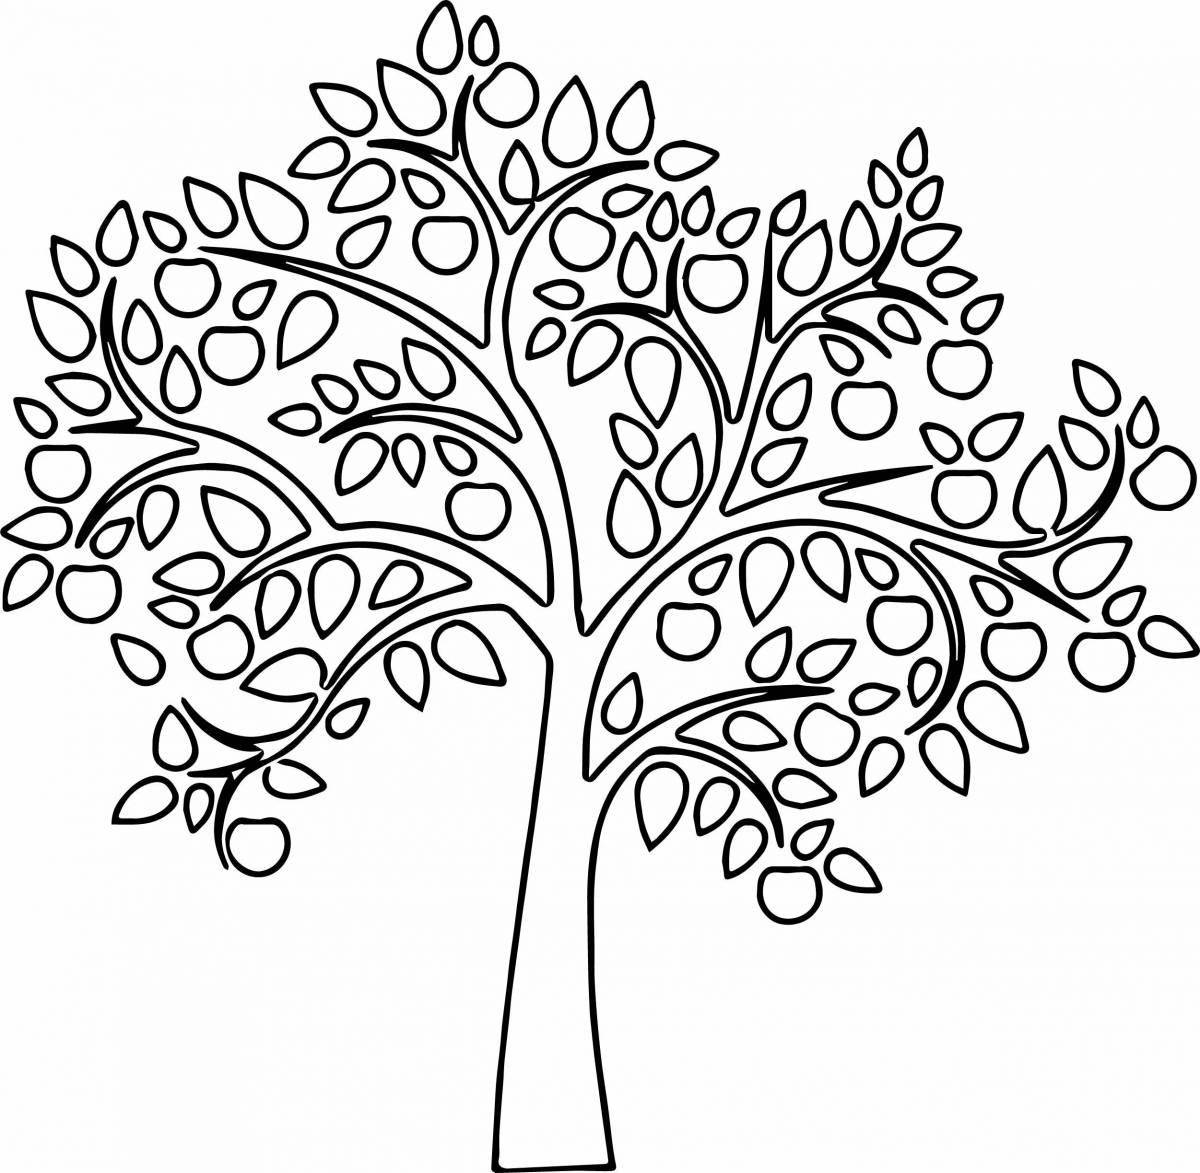 Coloring bright tree for children 5-6 years old